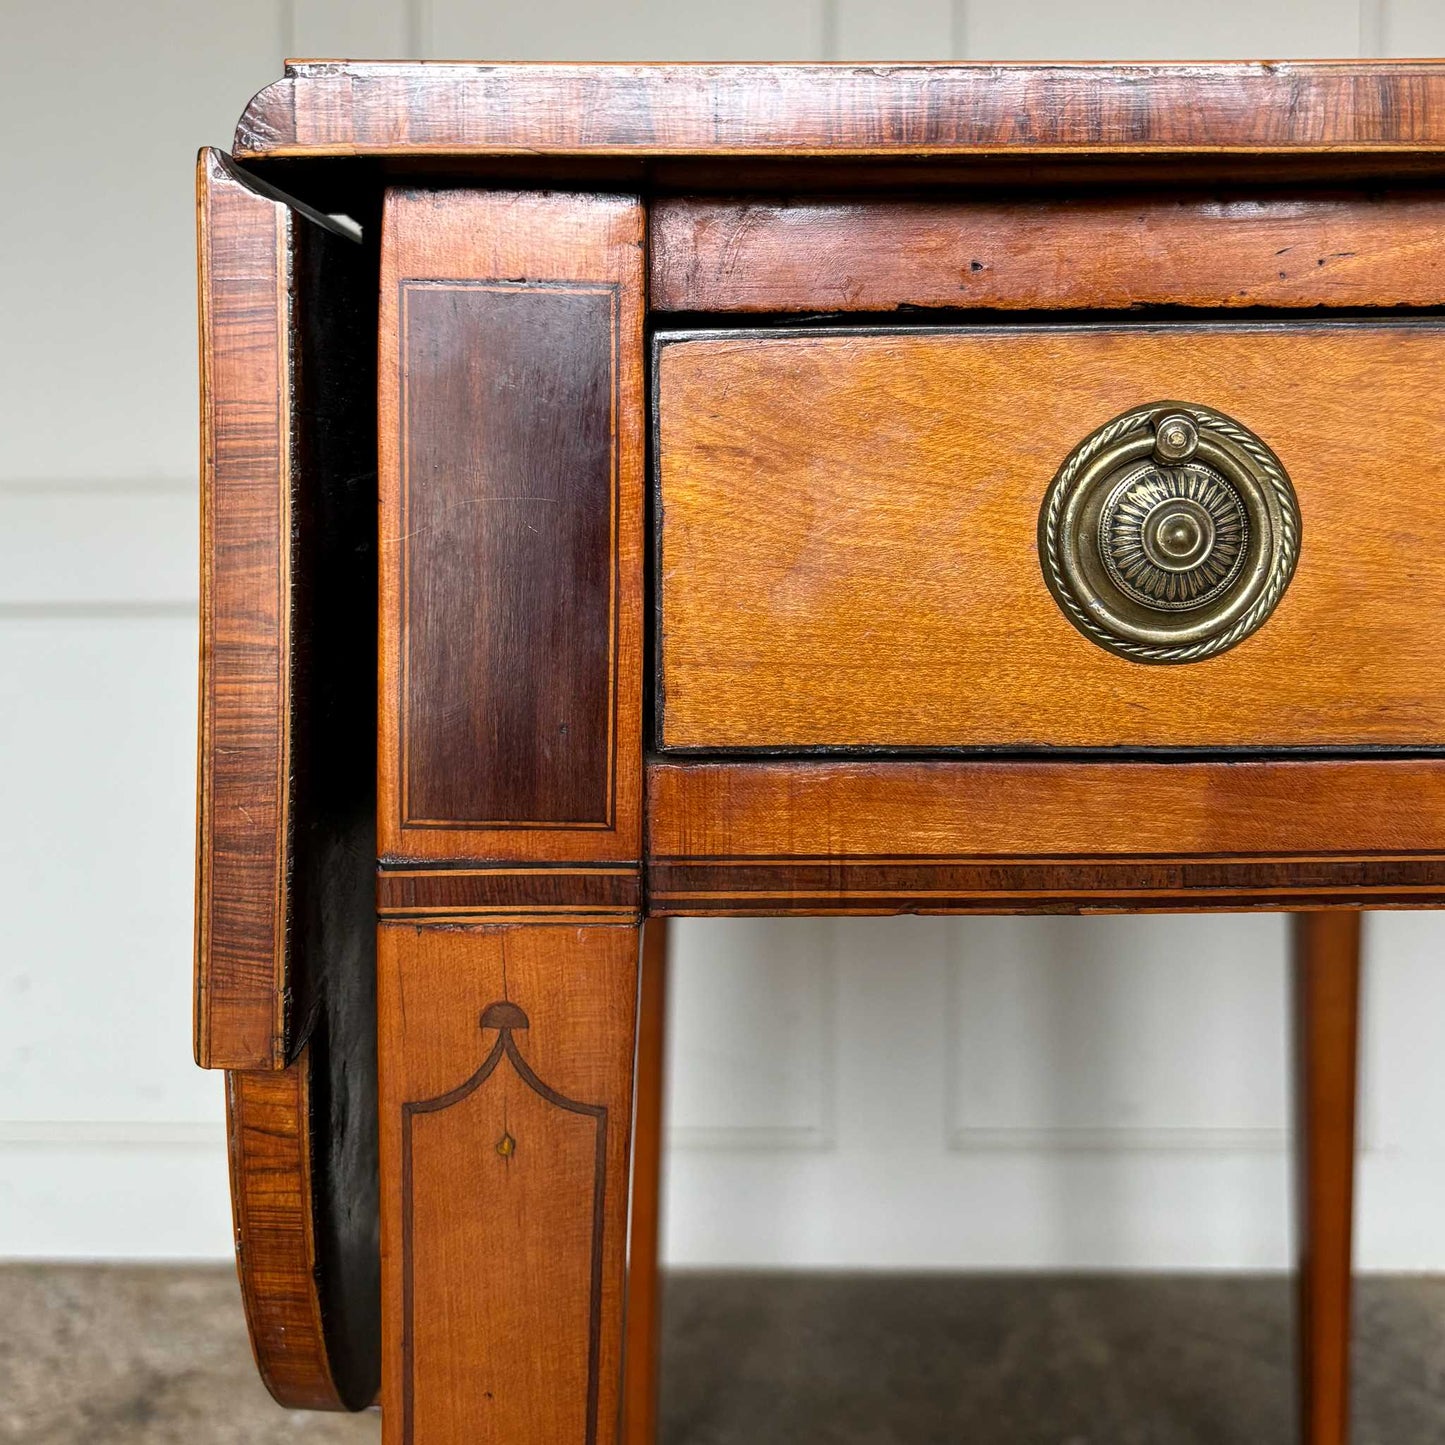 A lovely George III satinwood Pembroke table, the shaped drop leaf top with elegant crossbanding above a single end drawer with a dummy drawer on the opposing side, raised on gently tapering square legs with delicate inlay detailing over brass castors, with some gentle surface patina to the top as is commensurate with age and use, in very good condition